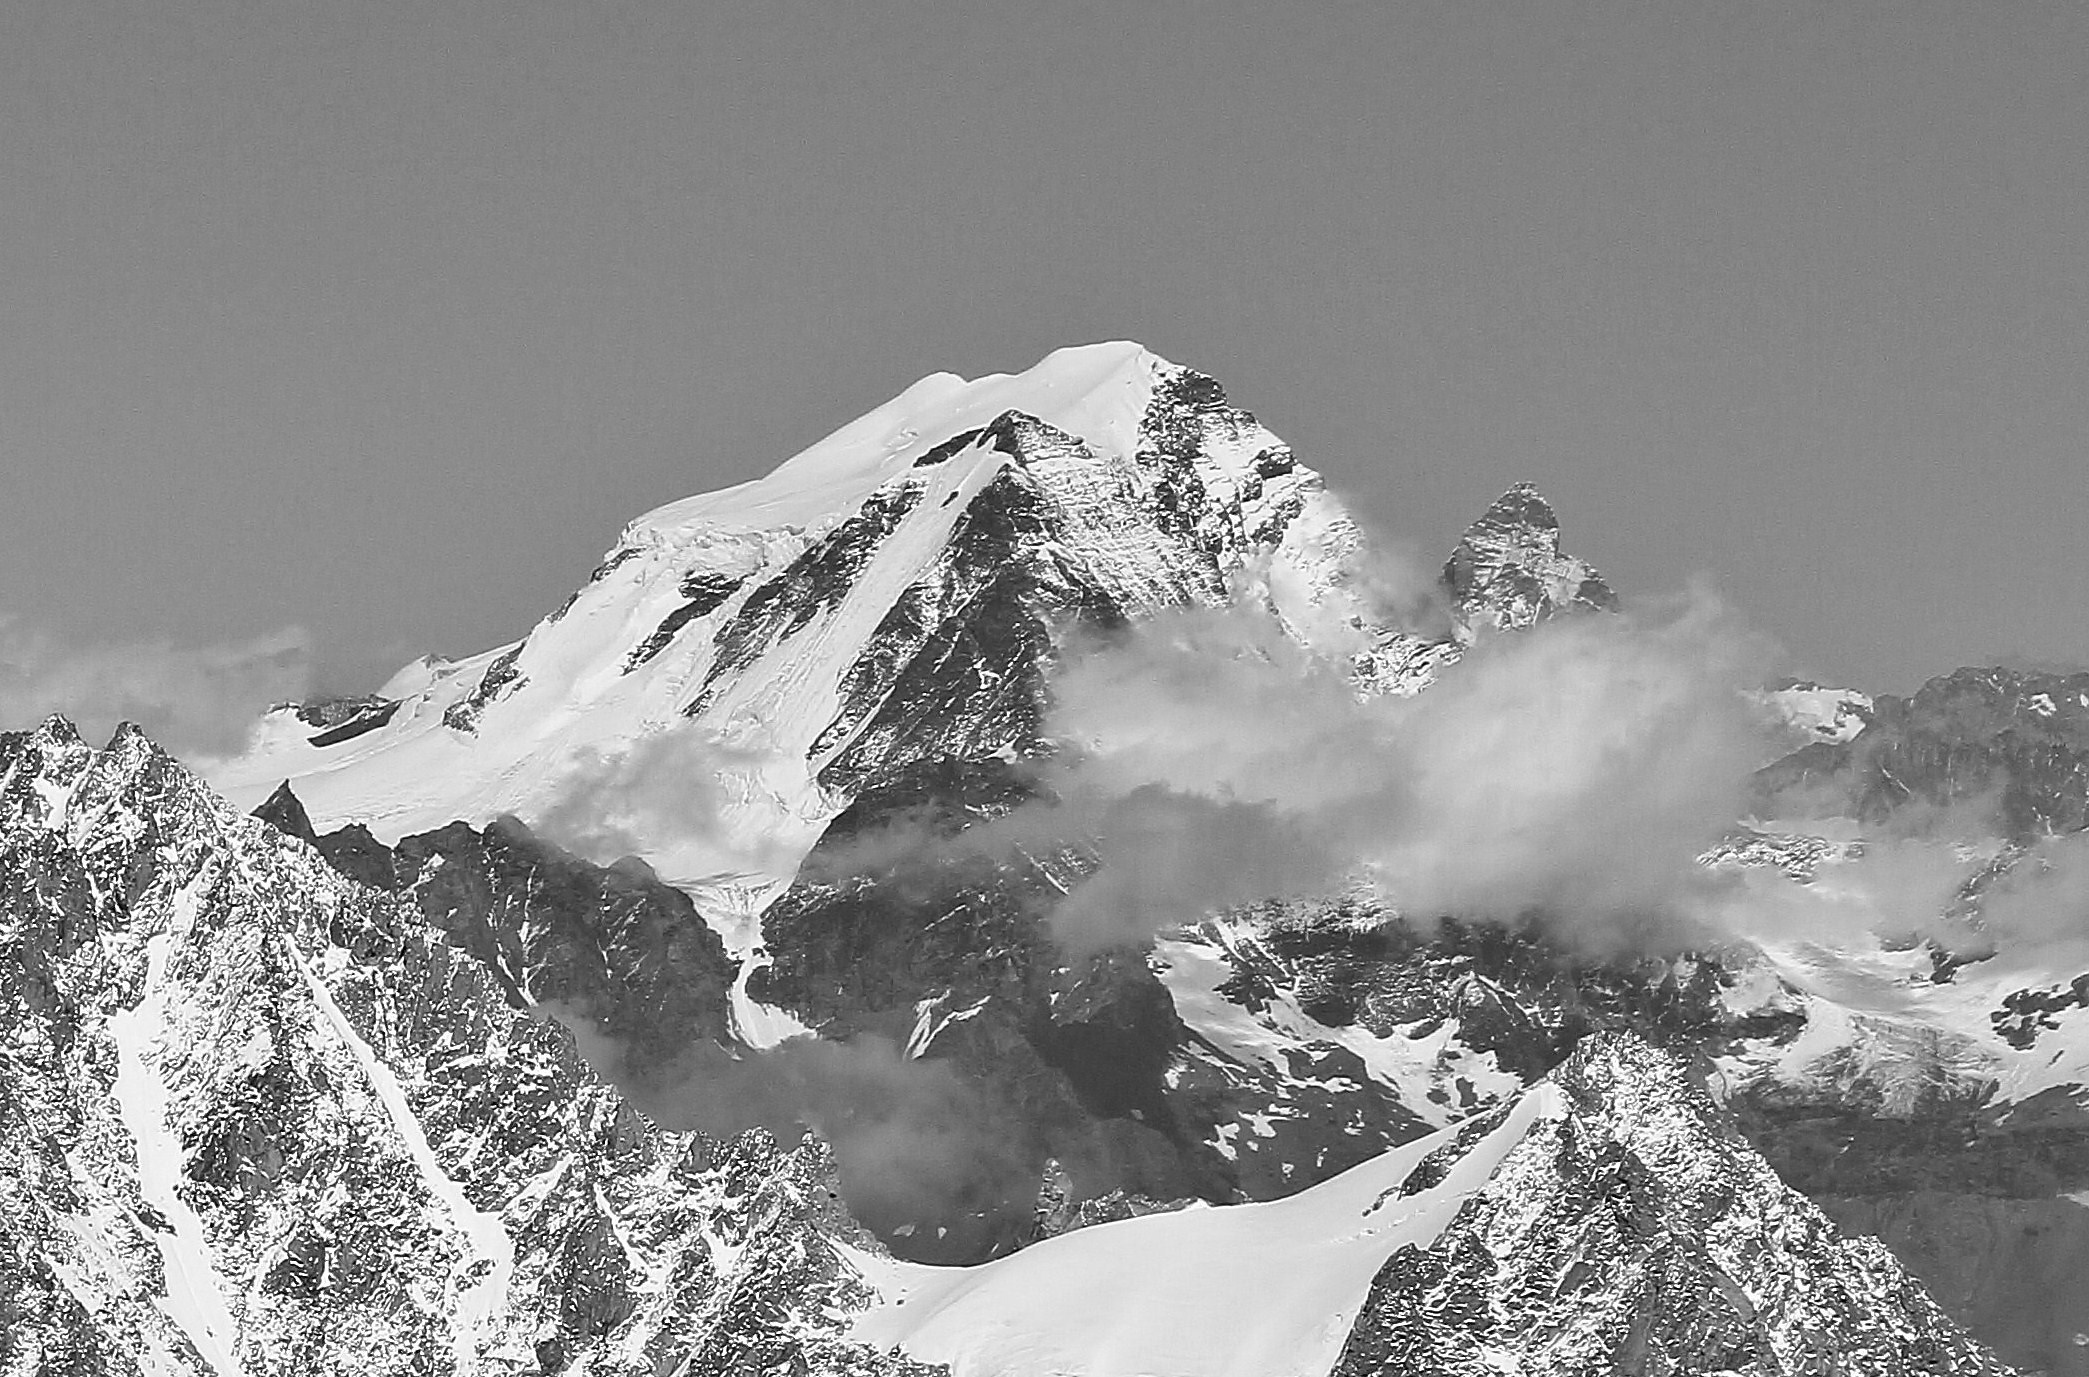 Grand Combin from Aiguille du Midi, 2010 July, bw